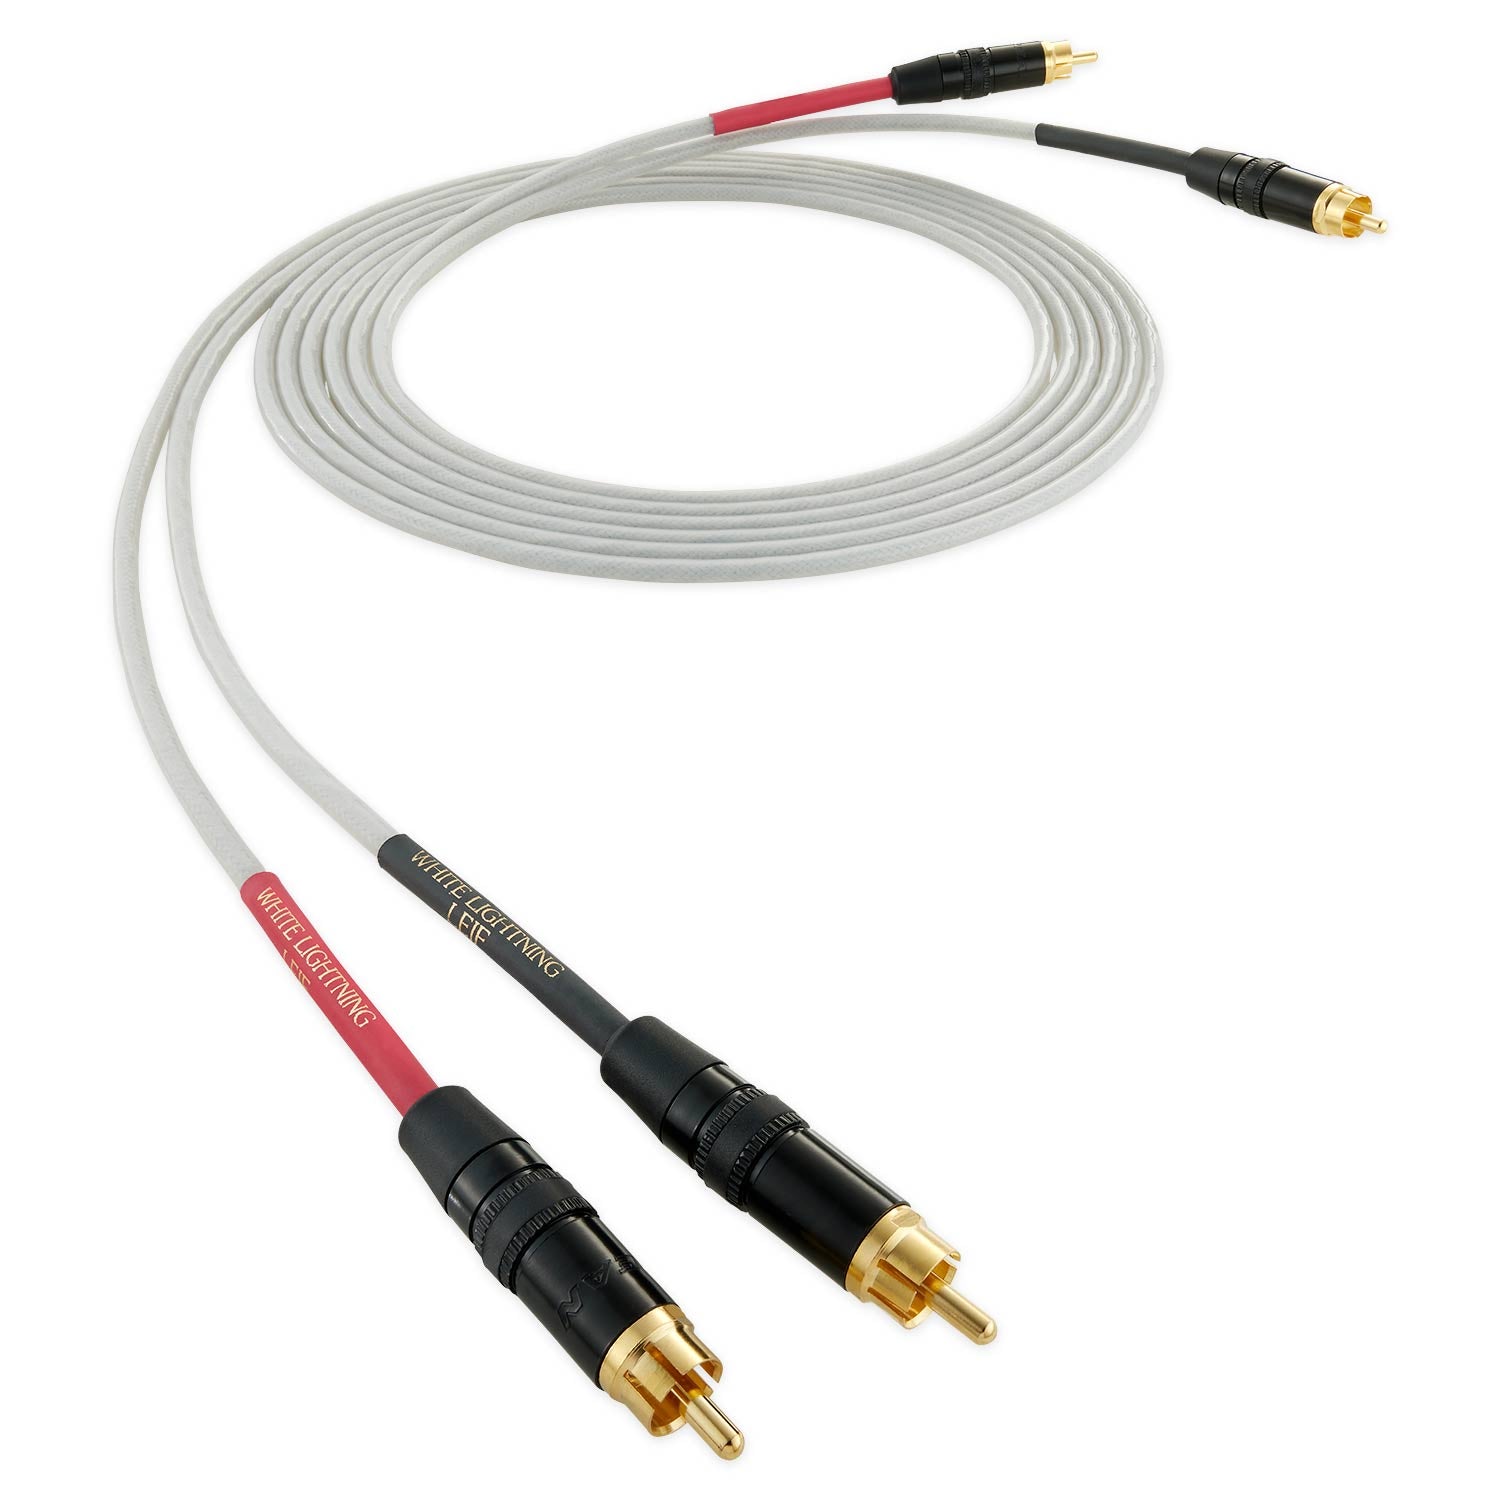 Nordost White Lightning Interconnect - Sold as a Pair